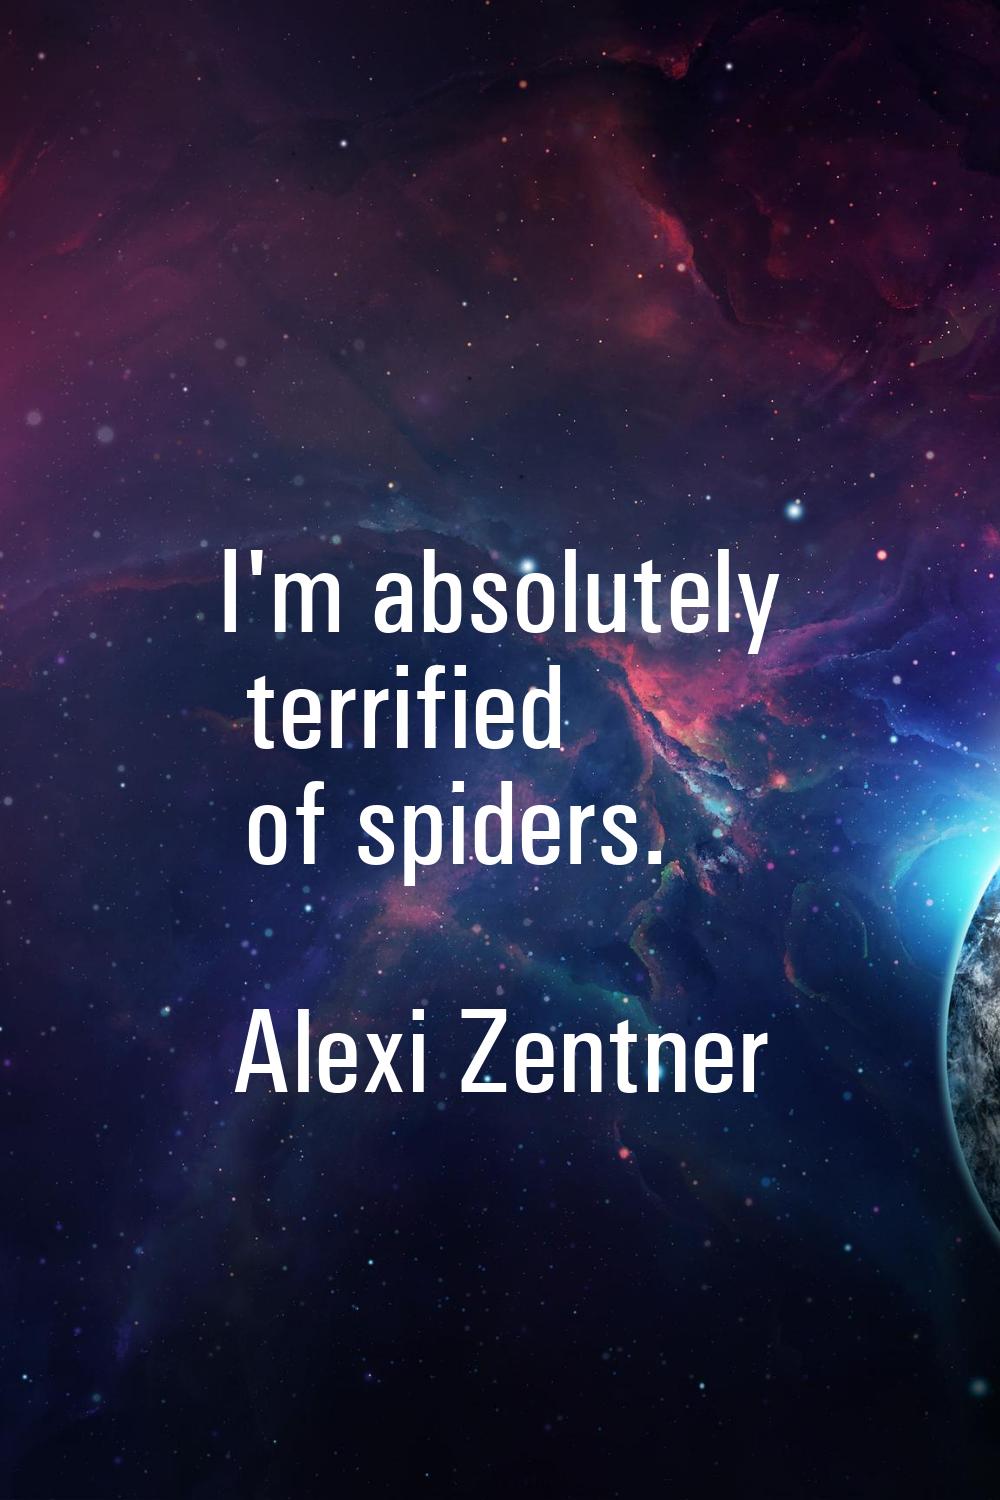 I'm absolutely terrified of spiders.